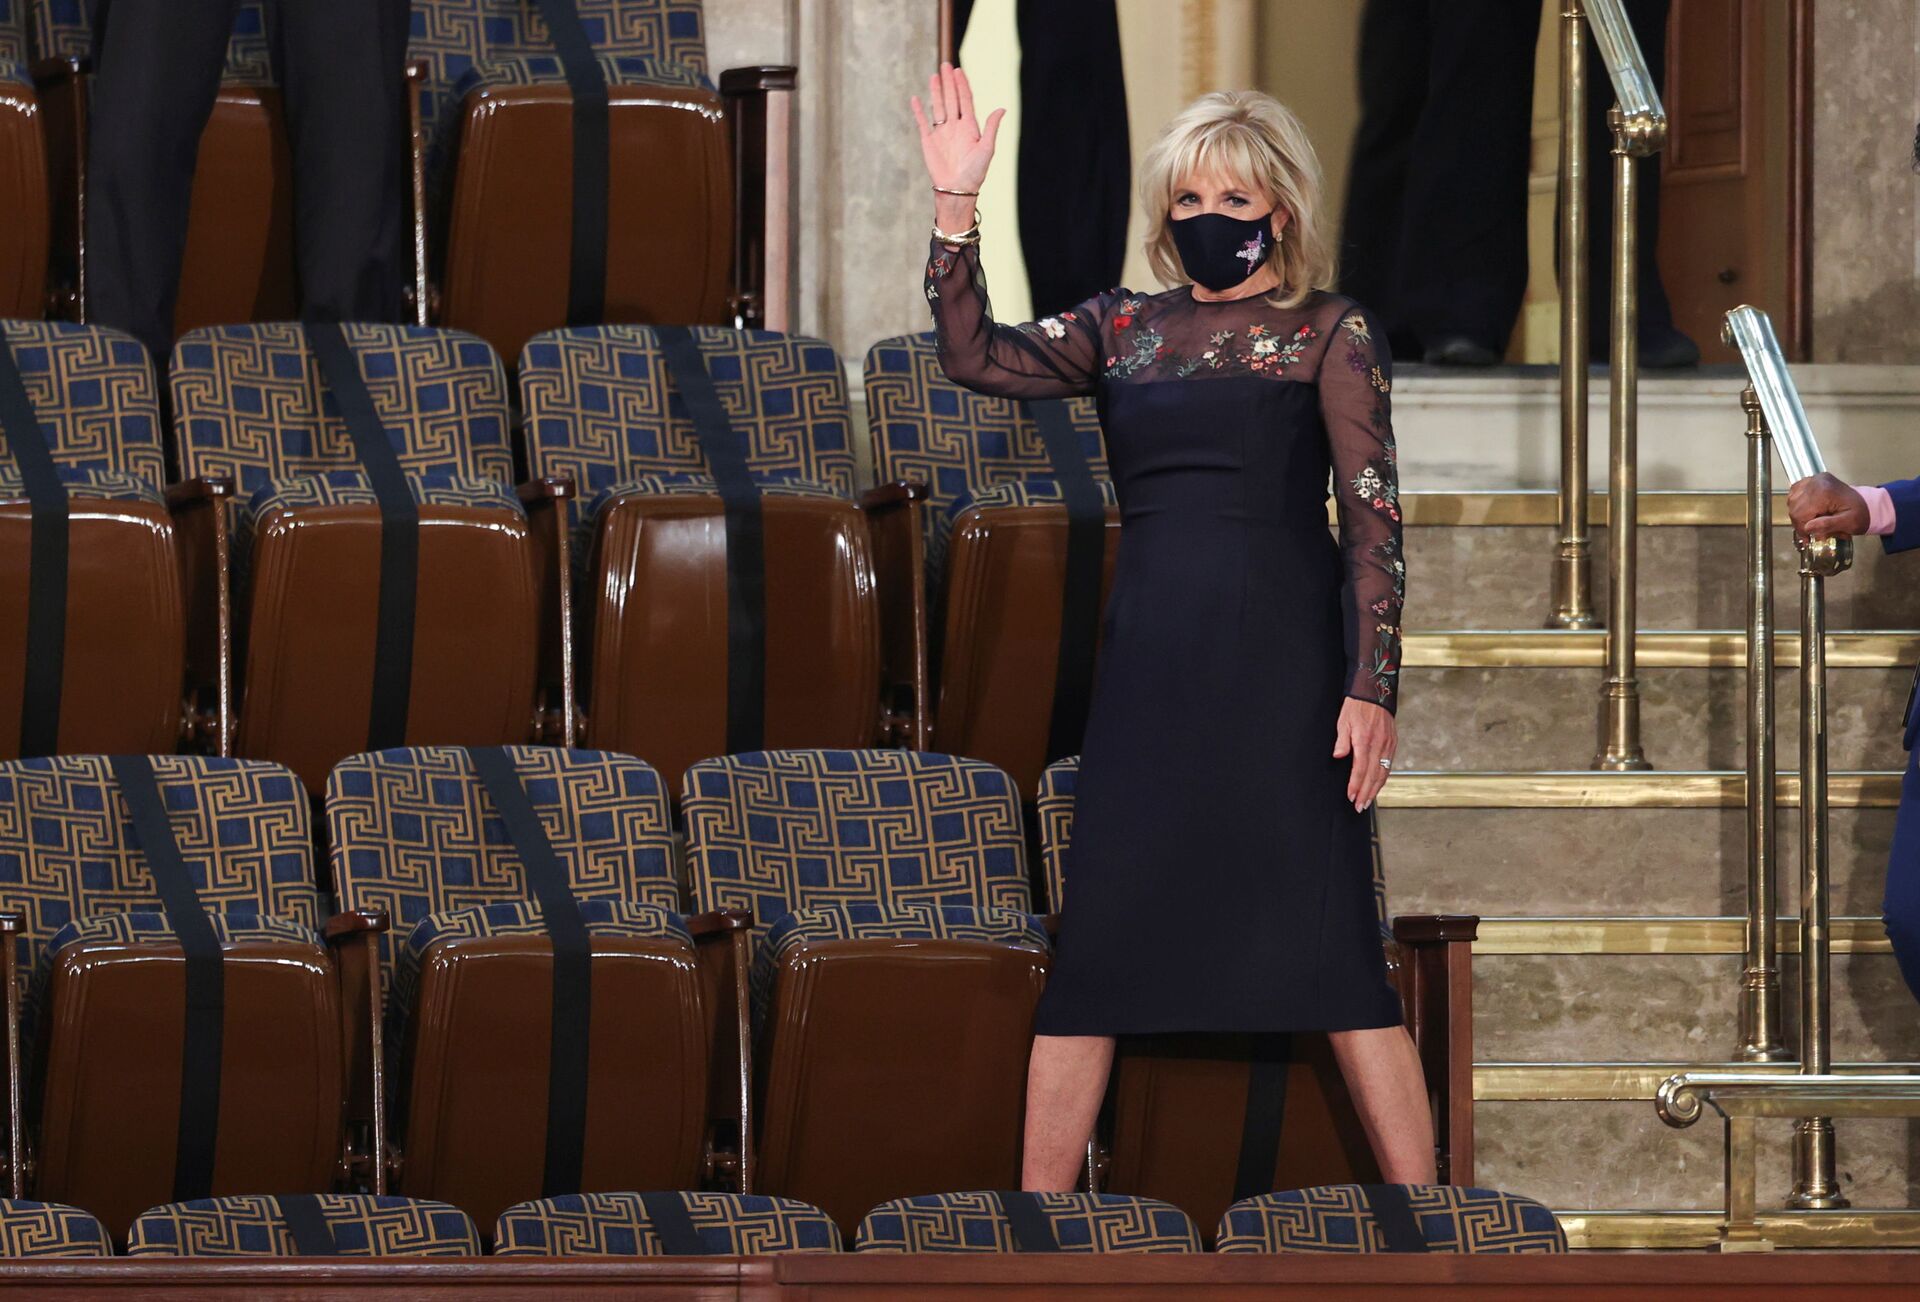 ‘Think She Dyed the Inaugural Dress?' Jill Biden Mocked Online For Swapping Colour But Not Design - Sputnik International, 1920, 29.04.2021